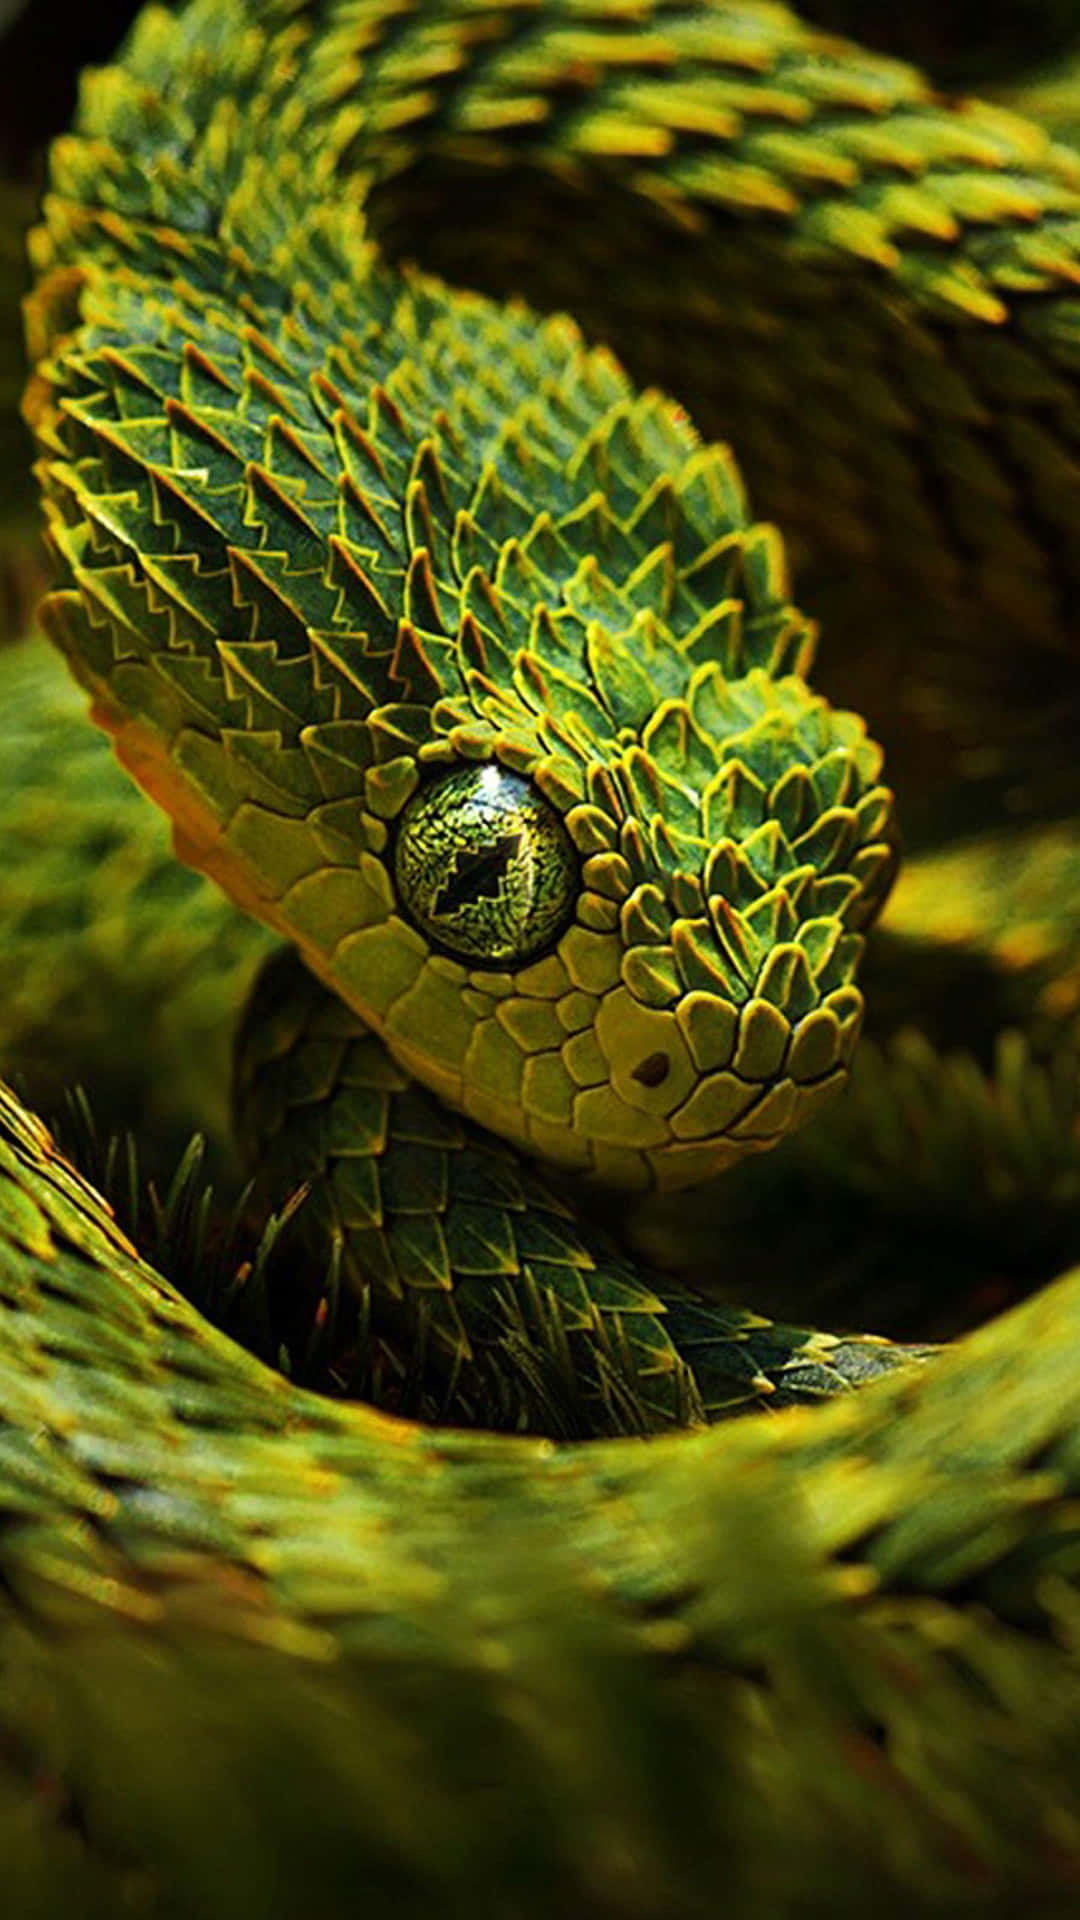 A Breathtakingly Cool Snake Slithers Along The Ground. Background